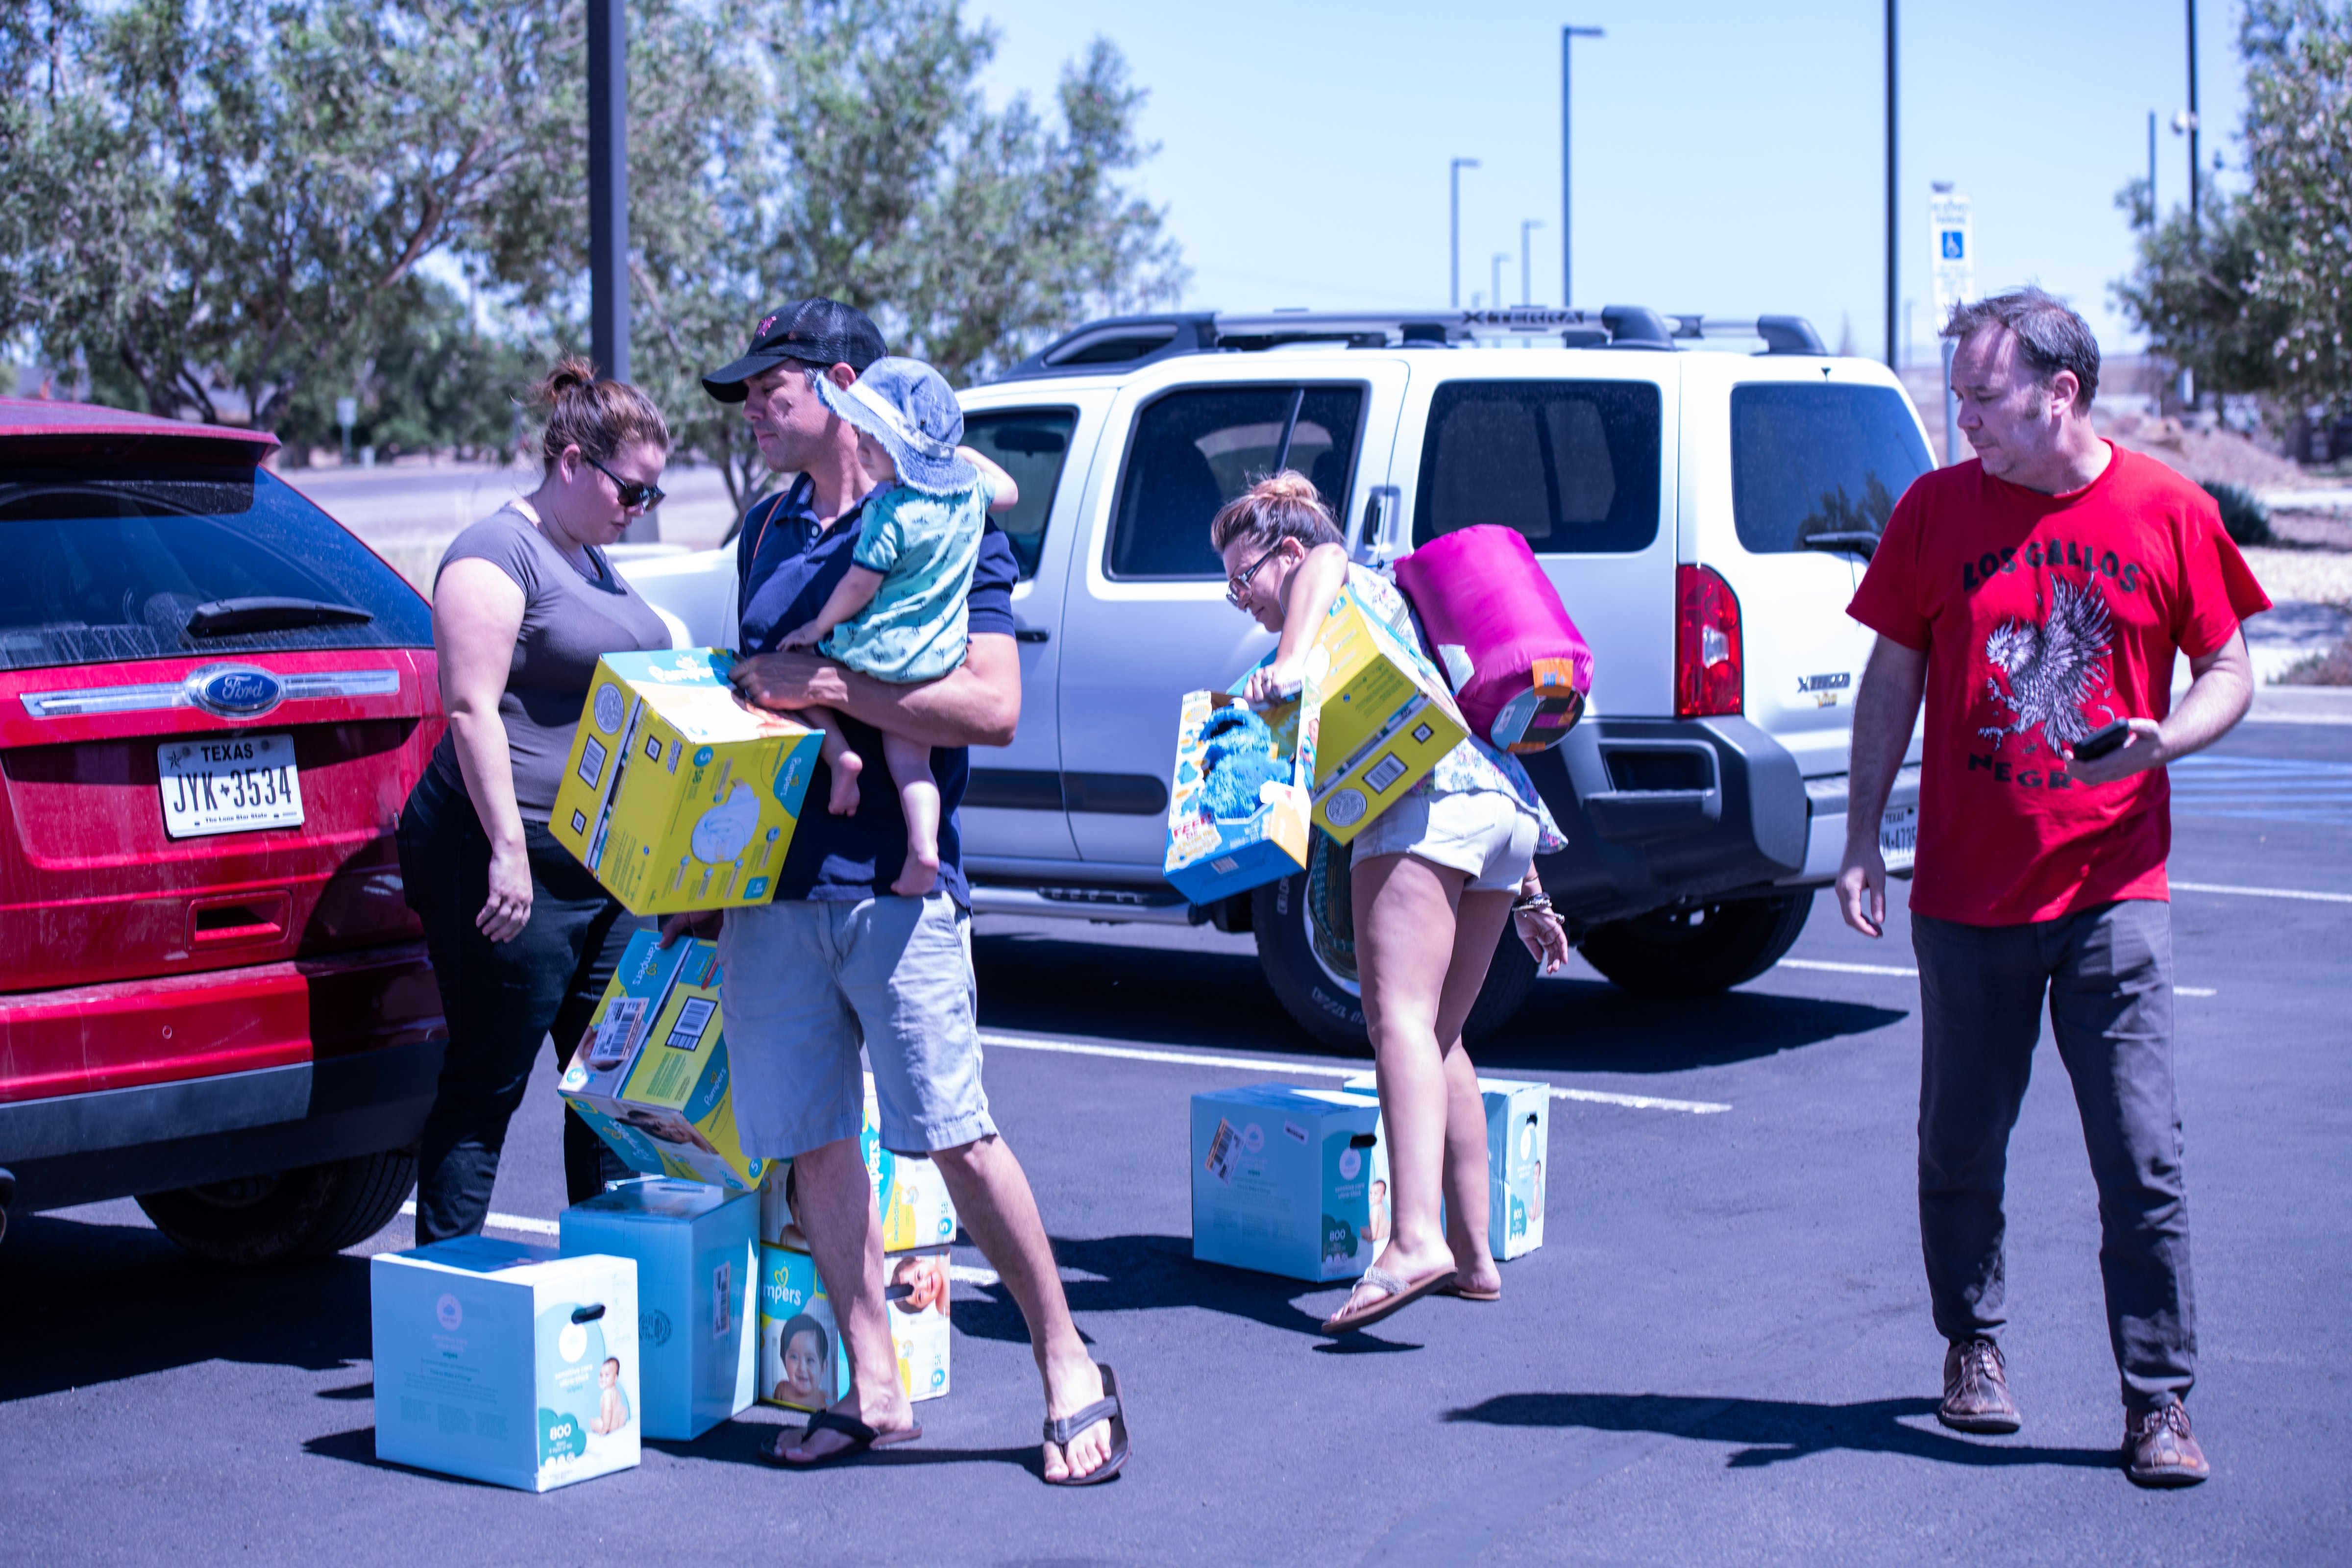 Andrew Savage (R) and donors attempt to deliver diapers and other goods to the Border Patrol facility in Clint, Texas housing child migrants on Sunday, June 23. (Courtesy Armando Martinez)